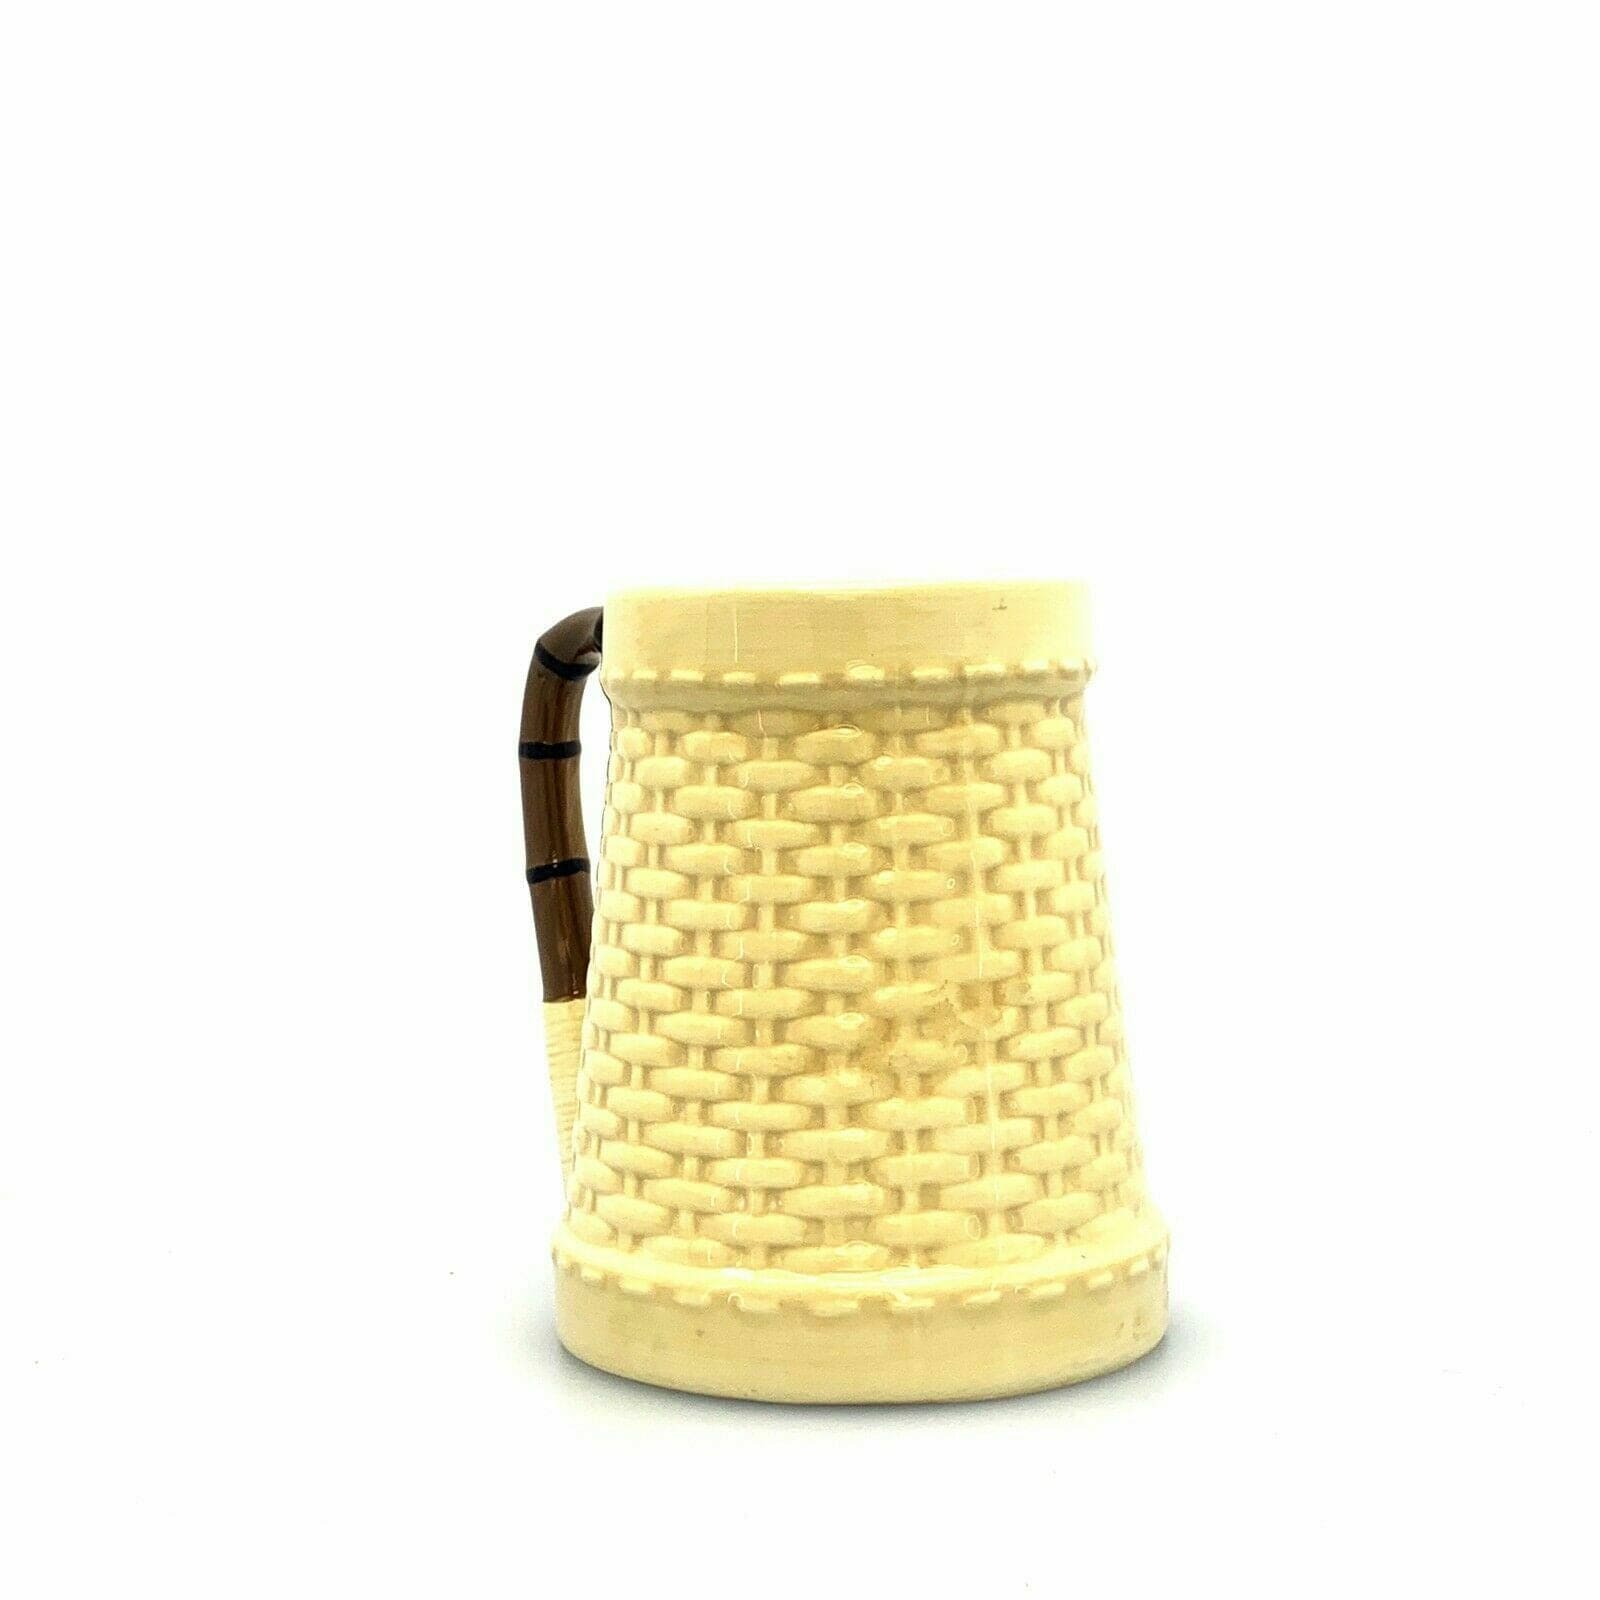 Field & Stream Fly Fishing Rod & Yellow Woven Tackle Box Drink